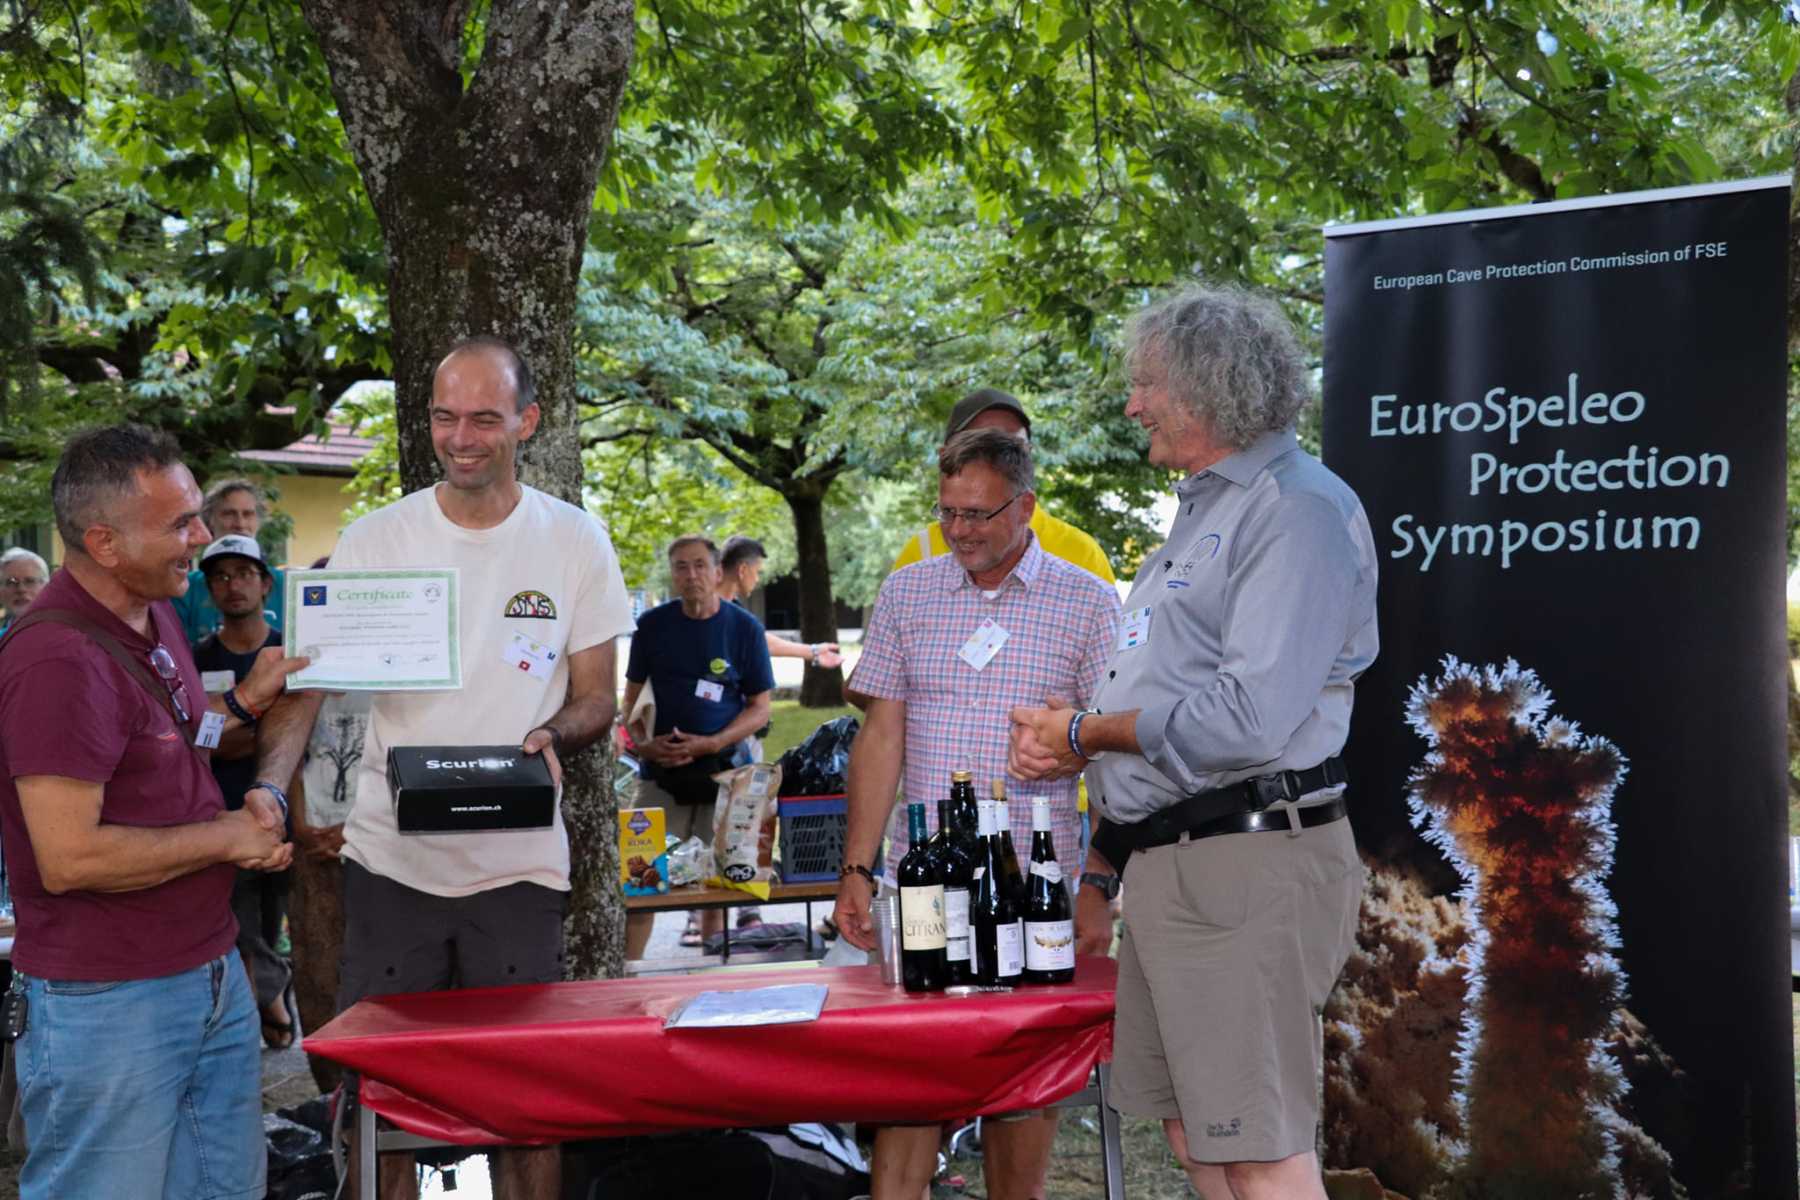 The price ceremony for the EuroSpeleo Protection Label presented by Jean-Claude Thies. Photo by Ernest Geyer